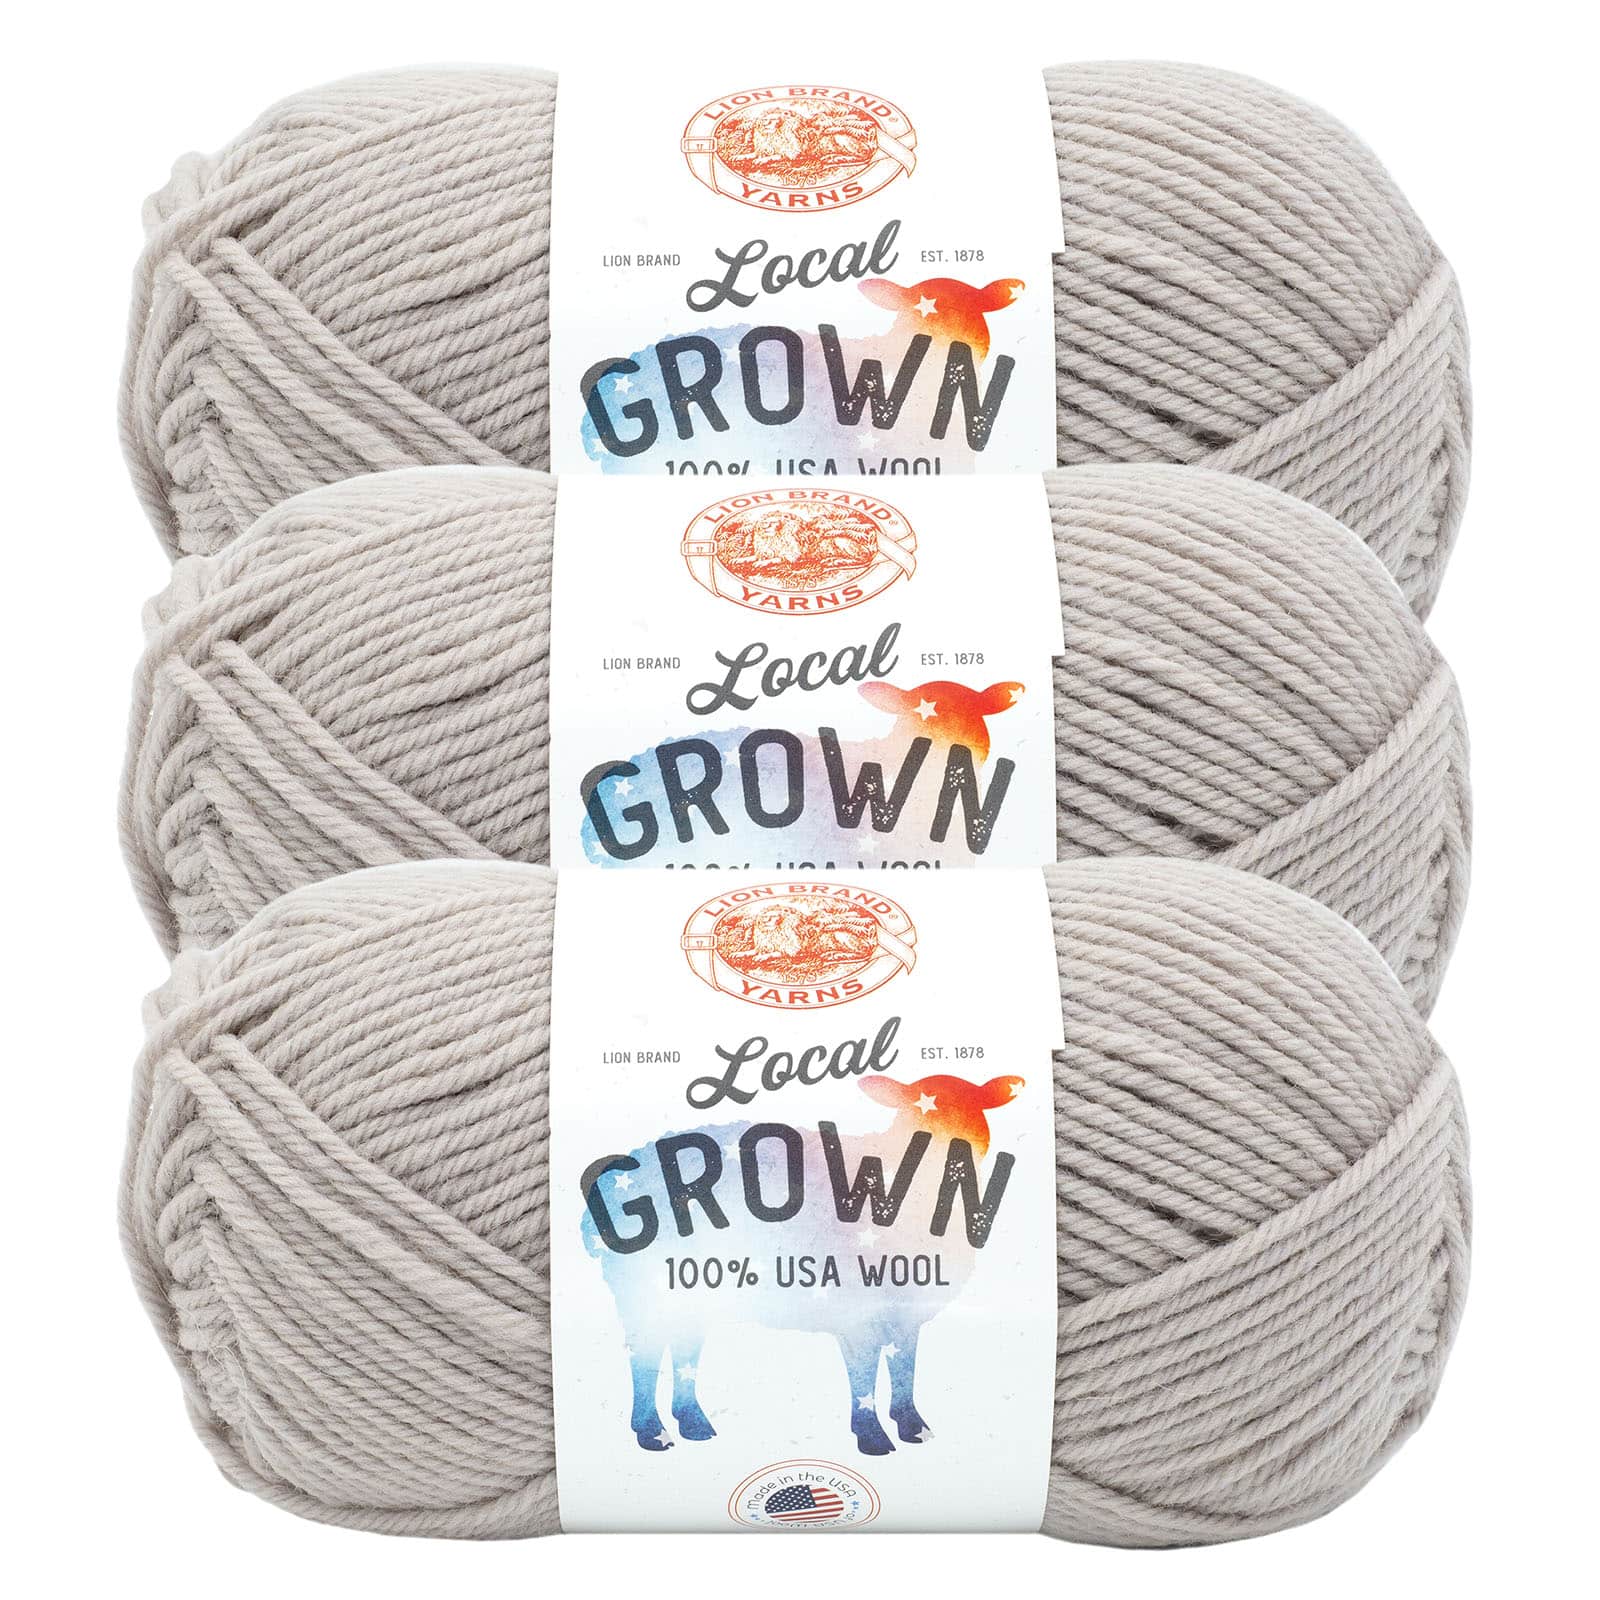 Lion Brand Local Grown Yarn Review - New 100% USA Wool, Made in the USA! 